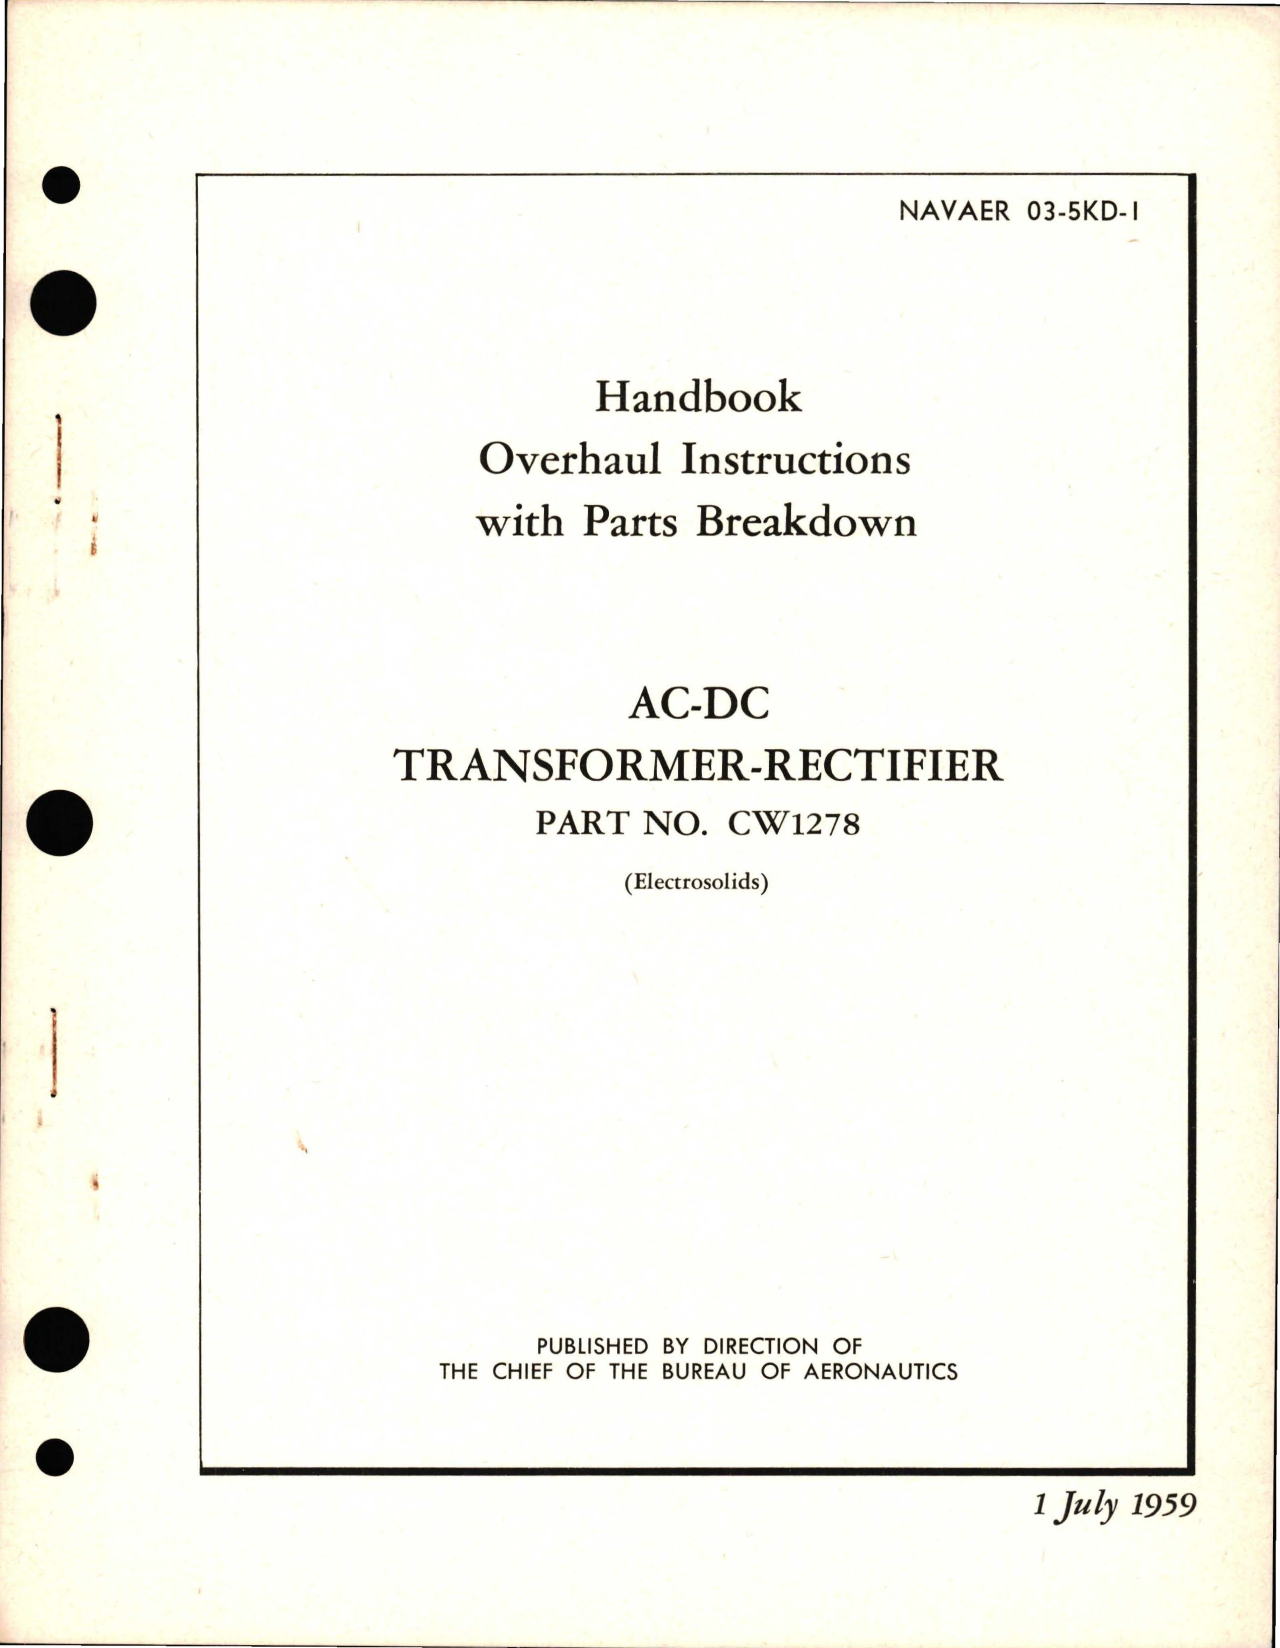 Sample page 1 from AirCorps Library document: Overhaul Instructions with Parts Breakdown for AC-DC Transformer Rectifier - Part CW1278